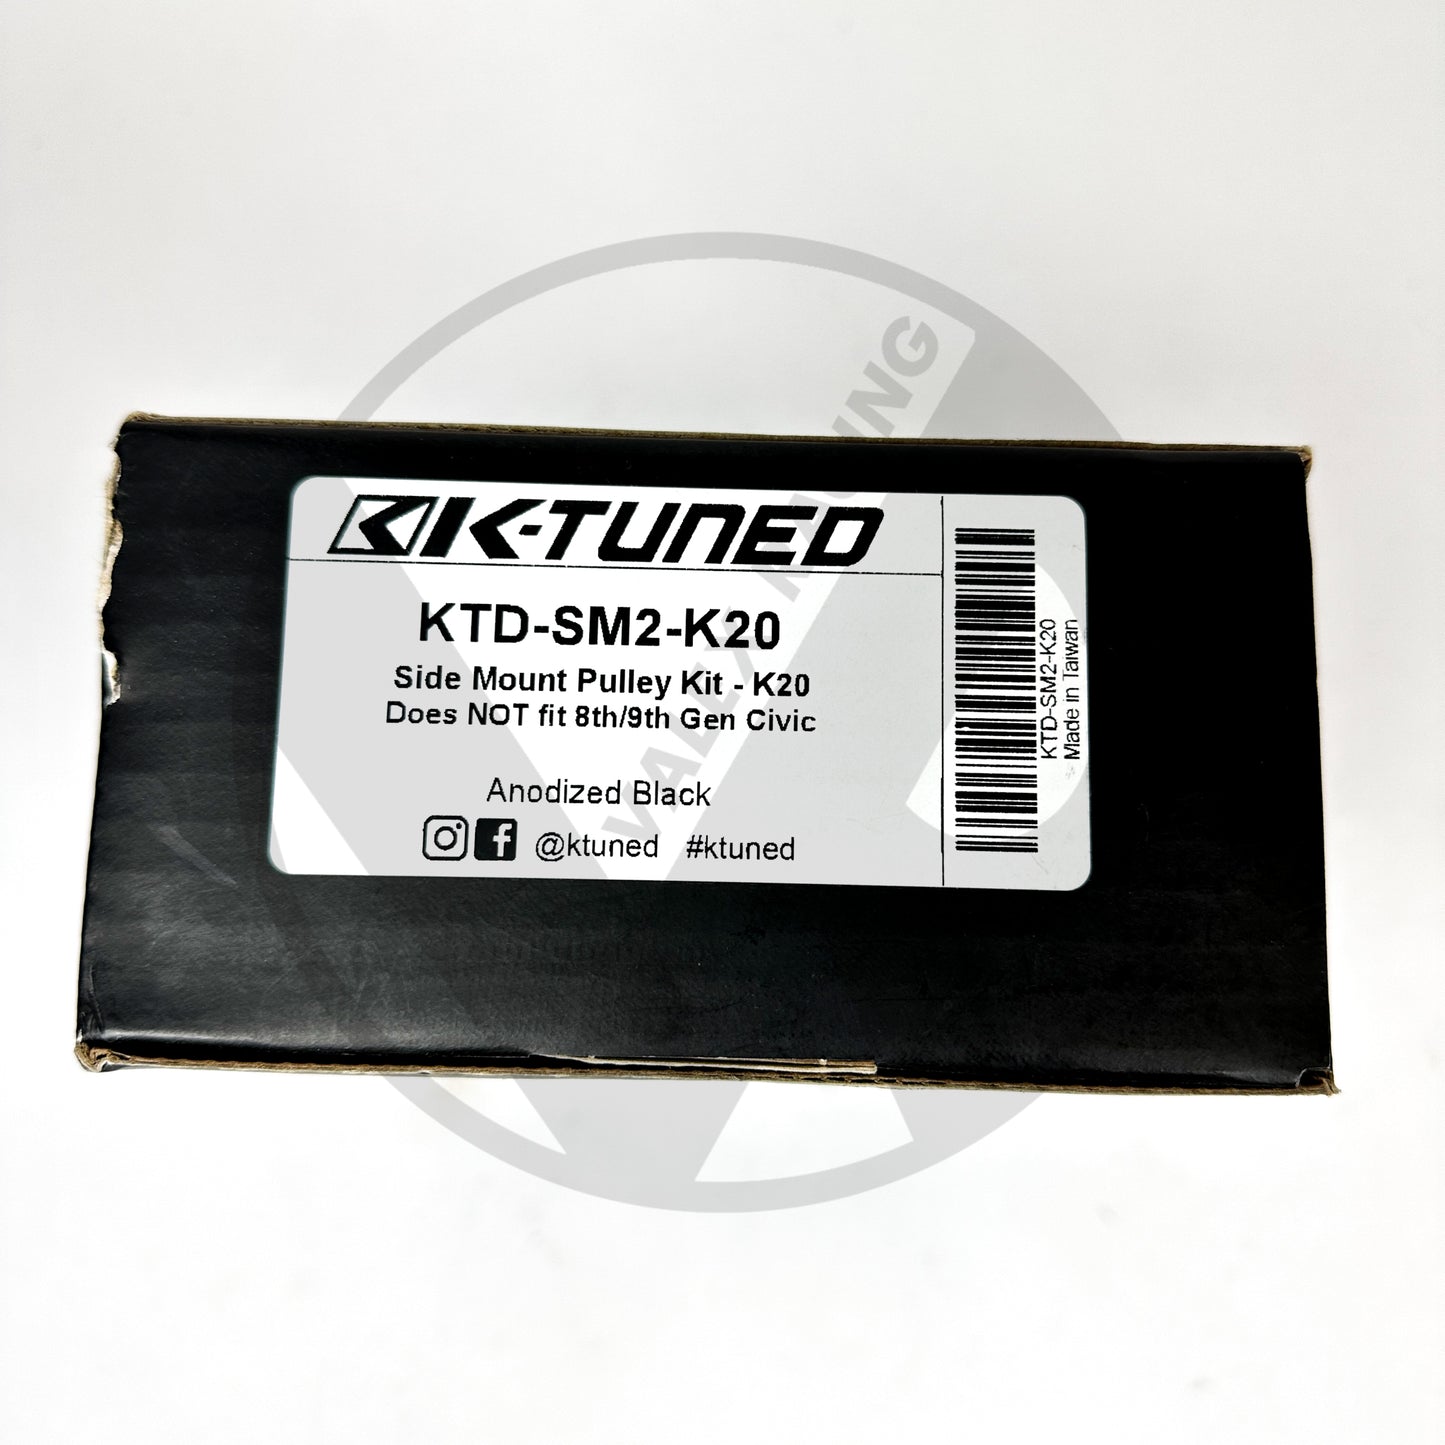 K-tuned Side Mount Pullet Kit For Honda Acura K20 and K24 Engines